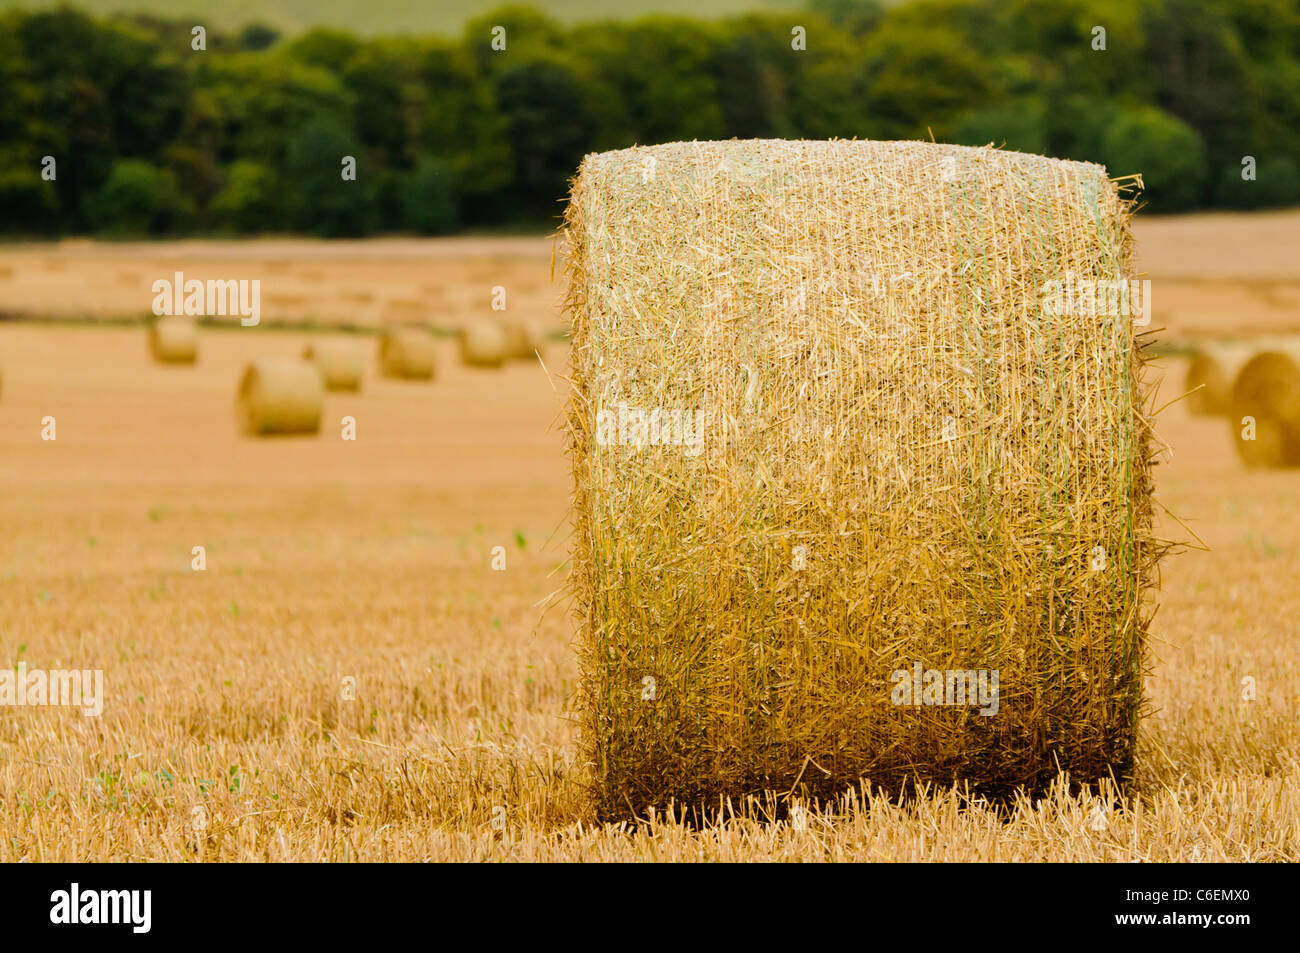 Large bales of hay in a field after harvesting Stock Photo